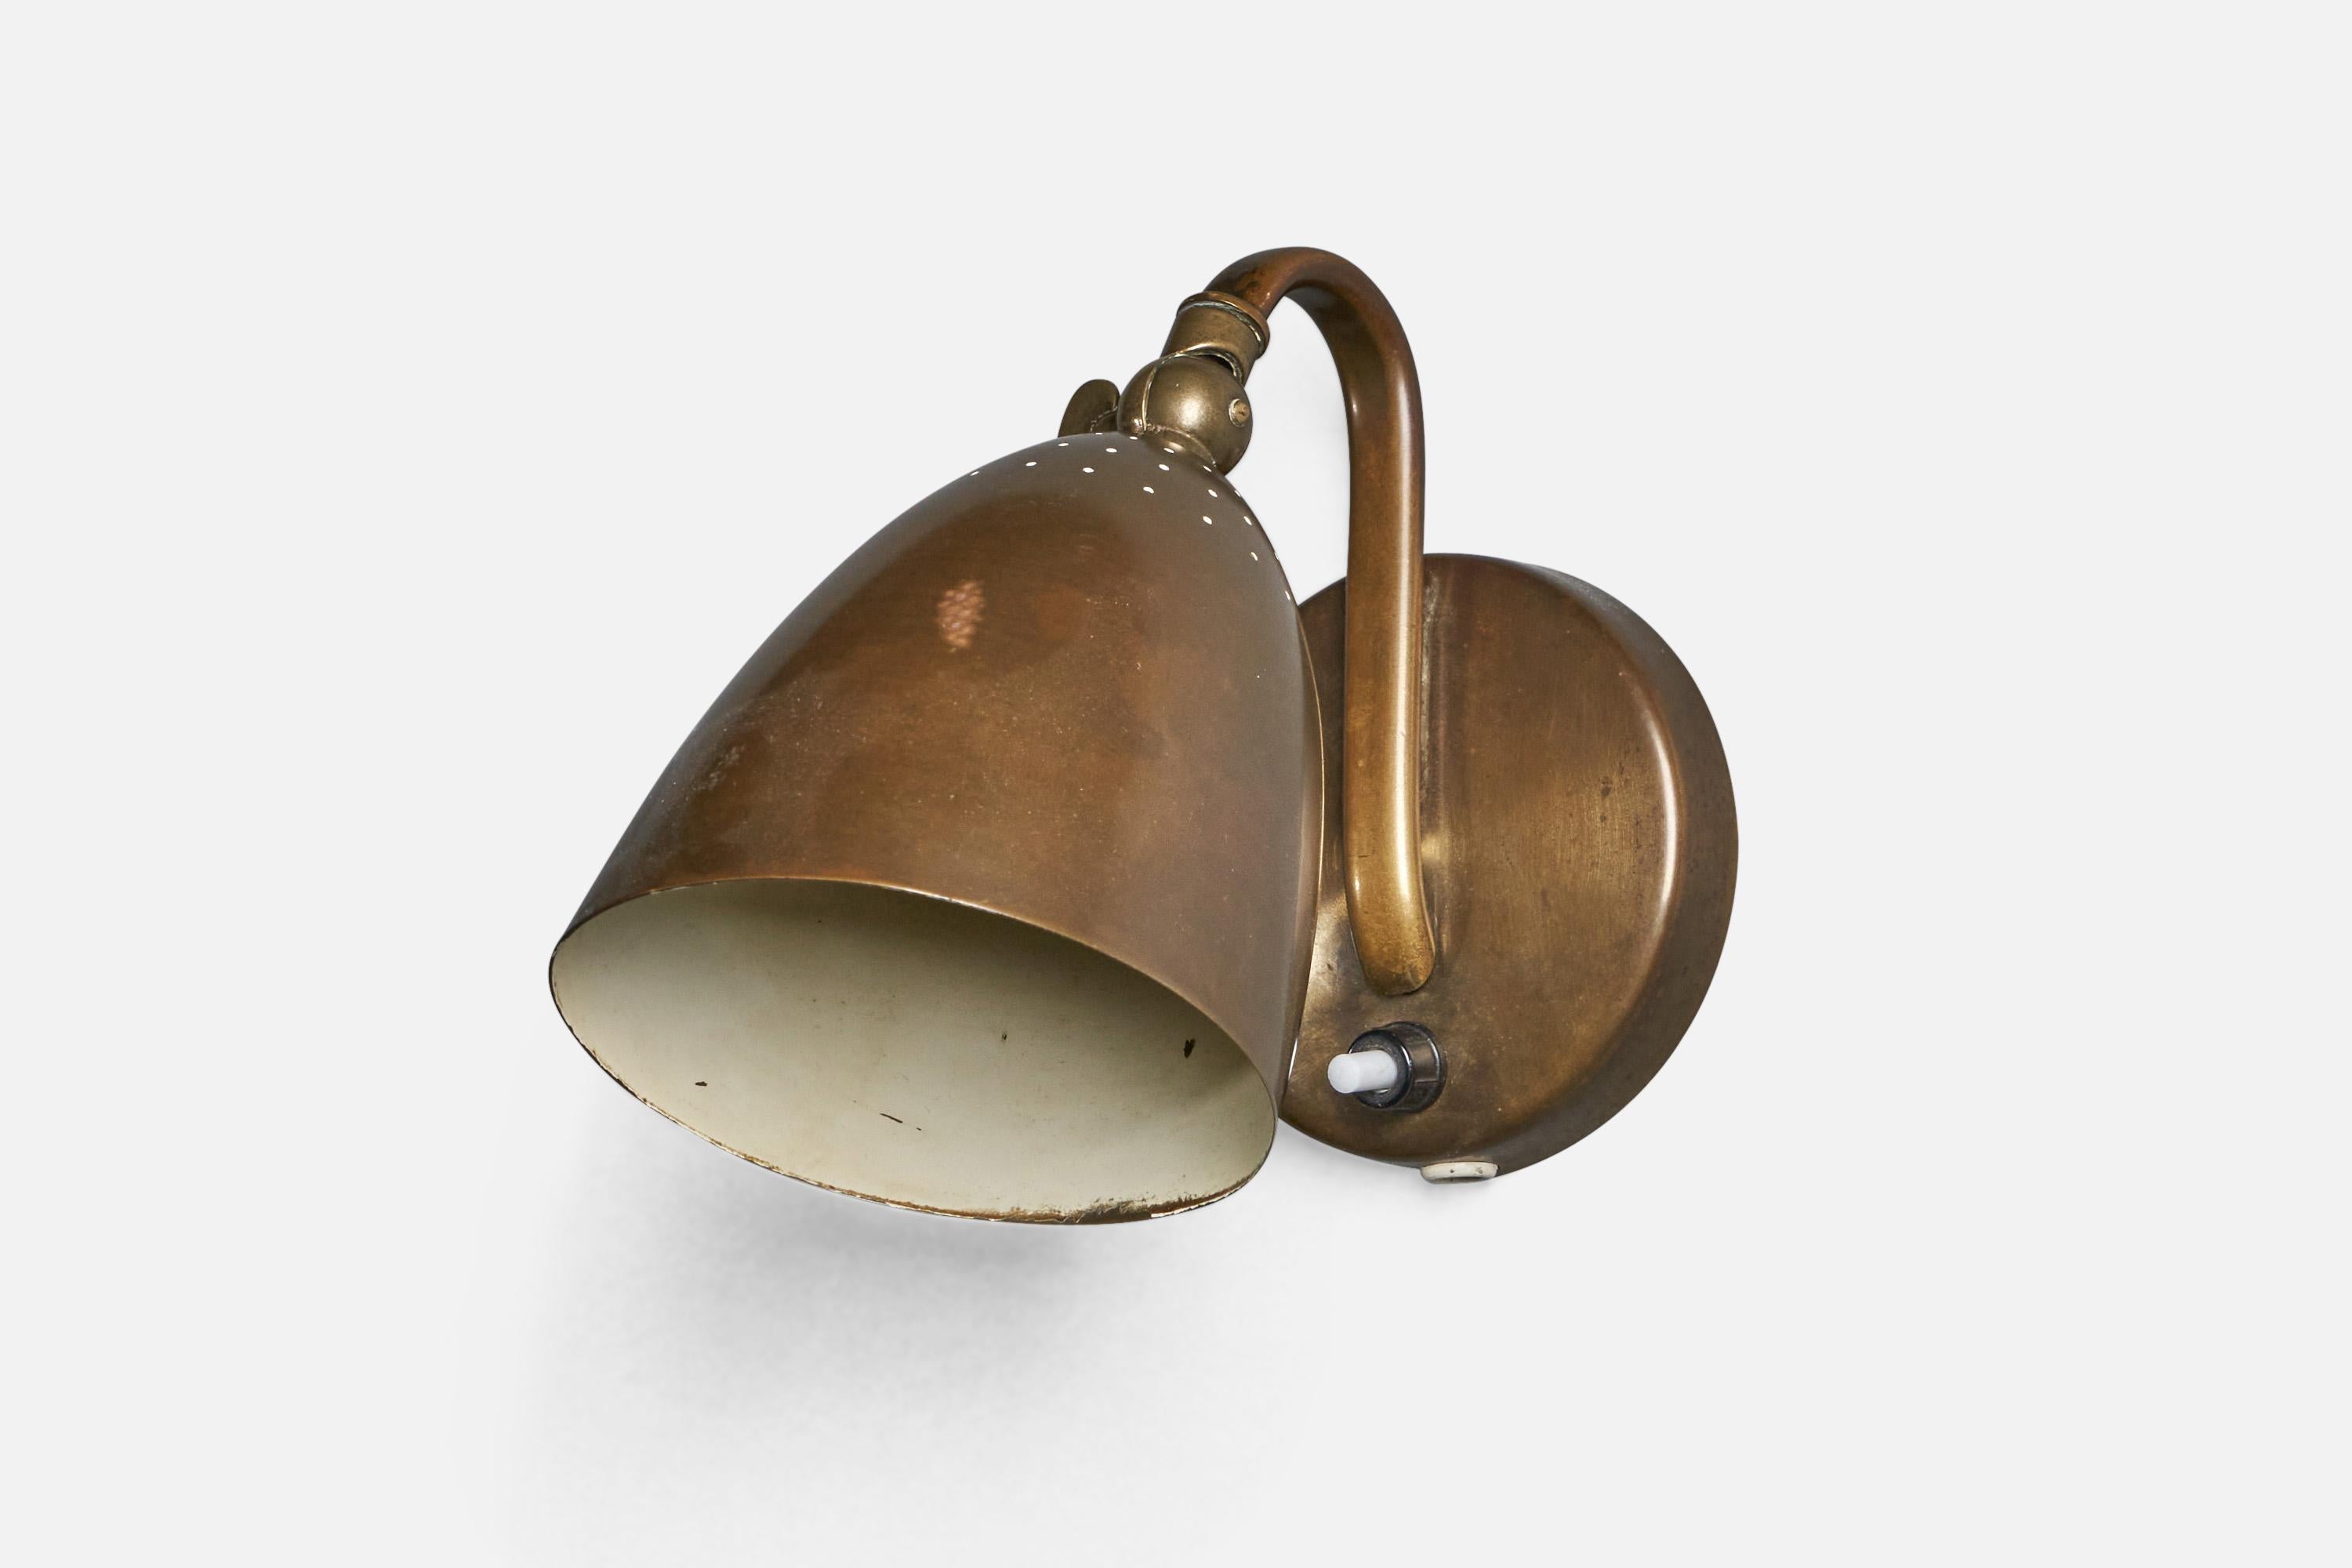 A brass wall light designed and produced in Denmark, 1940s.

Overall Dimensions (inches): 6.15